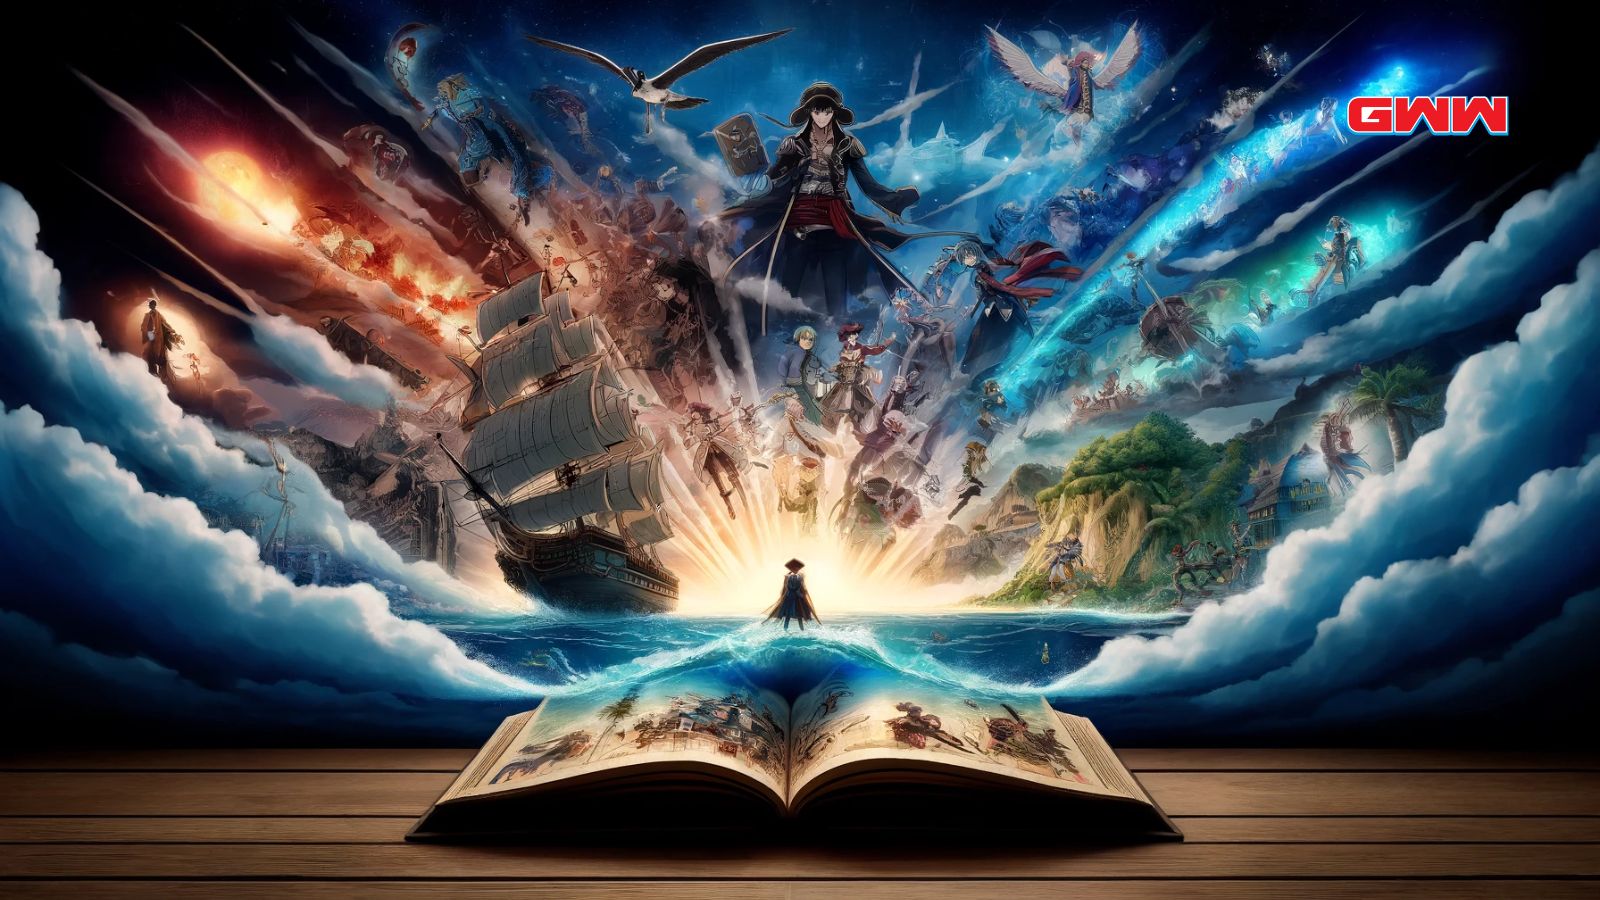 A captivating anime-style scene depicting an open book with pages transforming into vivid scenes from a pirate-themed anime